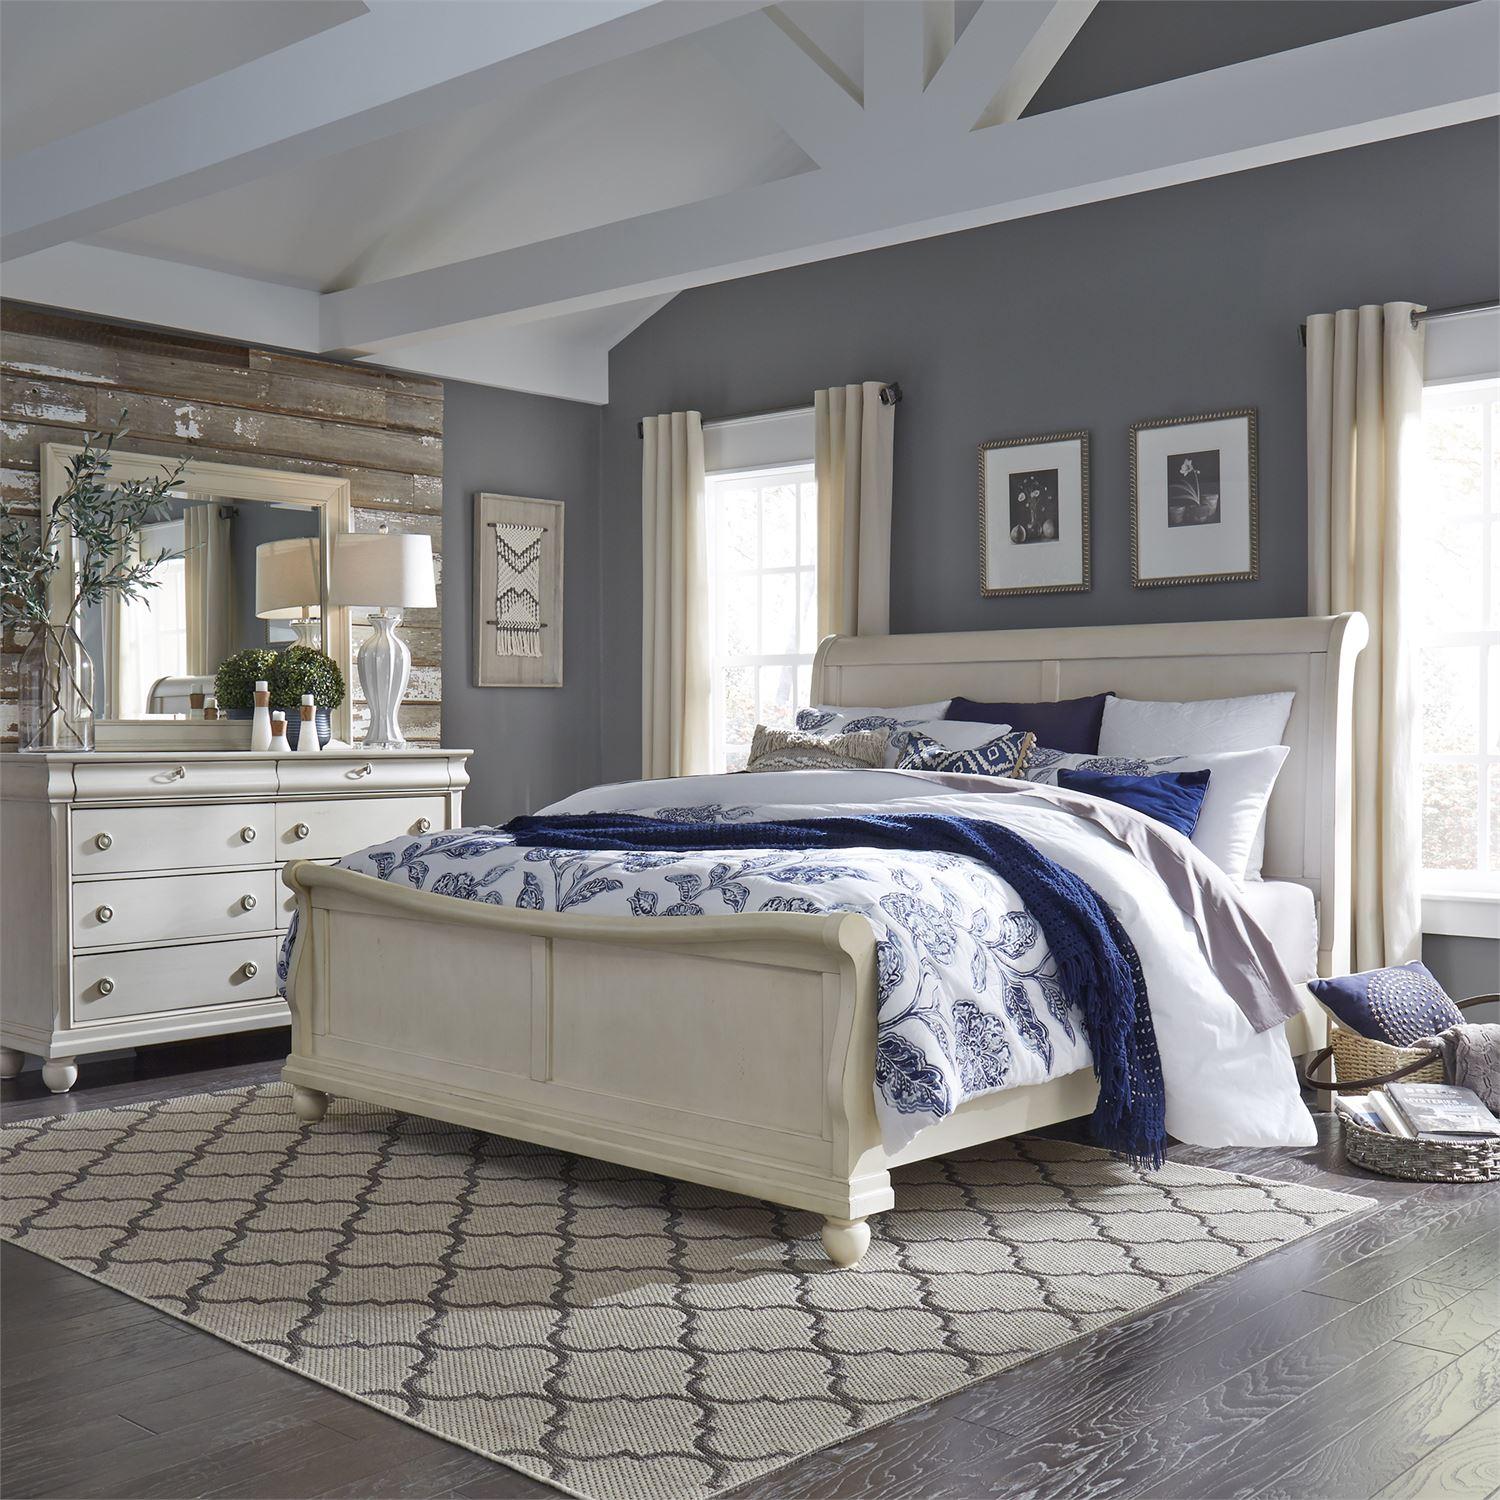 Traditional Sleigh Bedroom Set Rustic Traditions II  (689-BR) Sleigh Bedroom Set 689-BR-QSLDM in White 